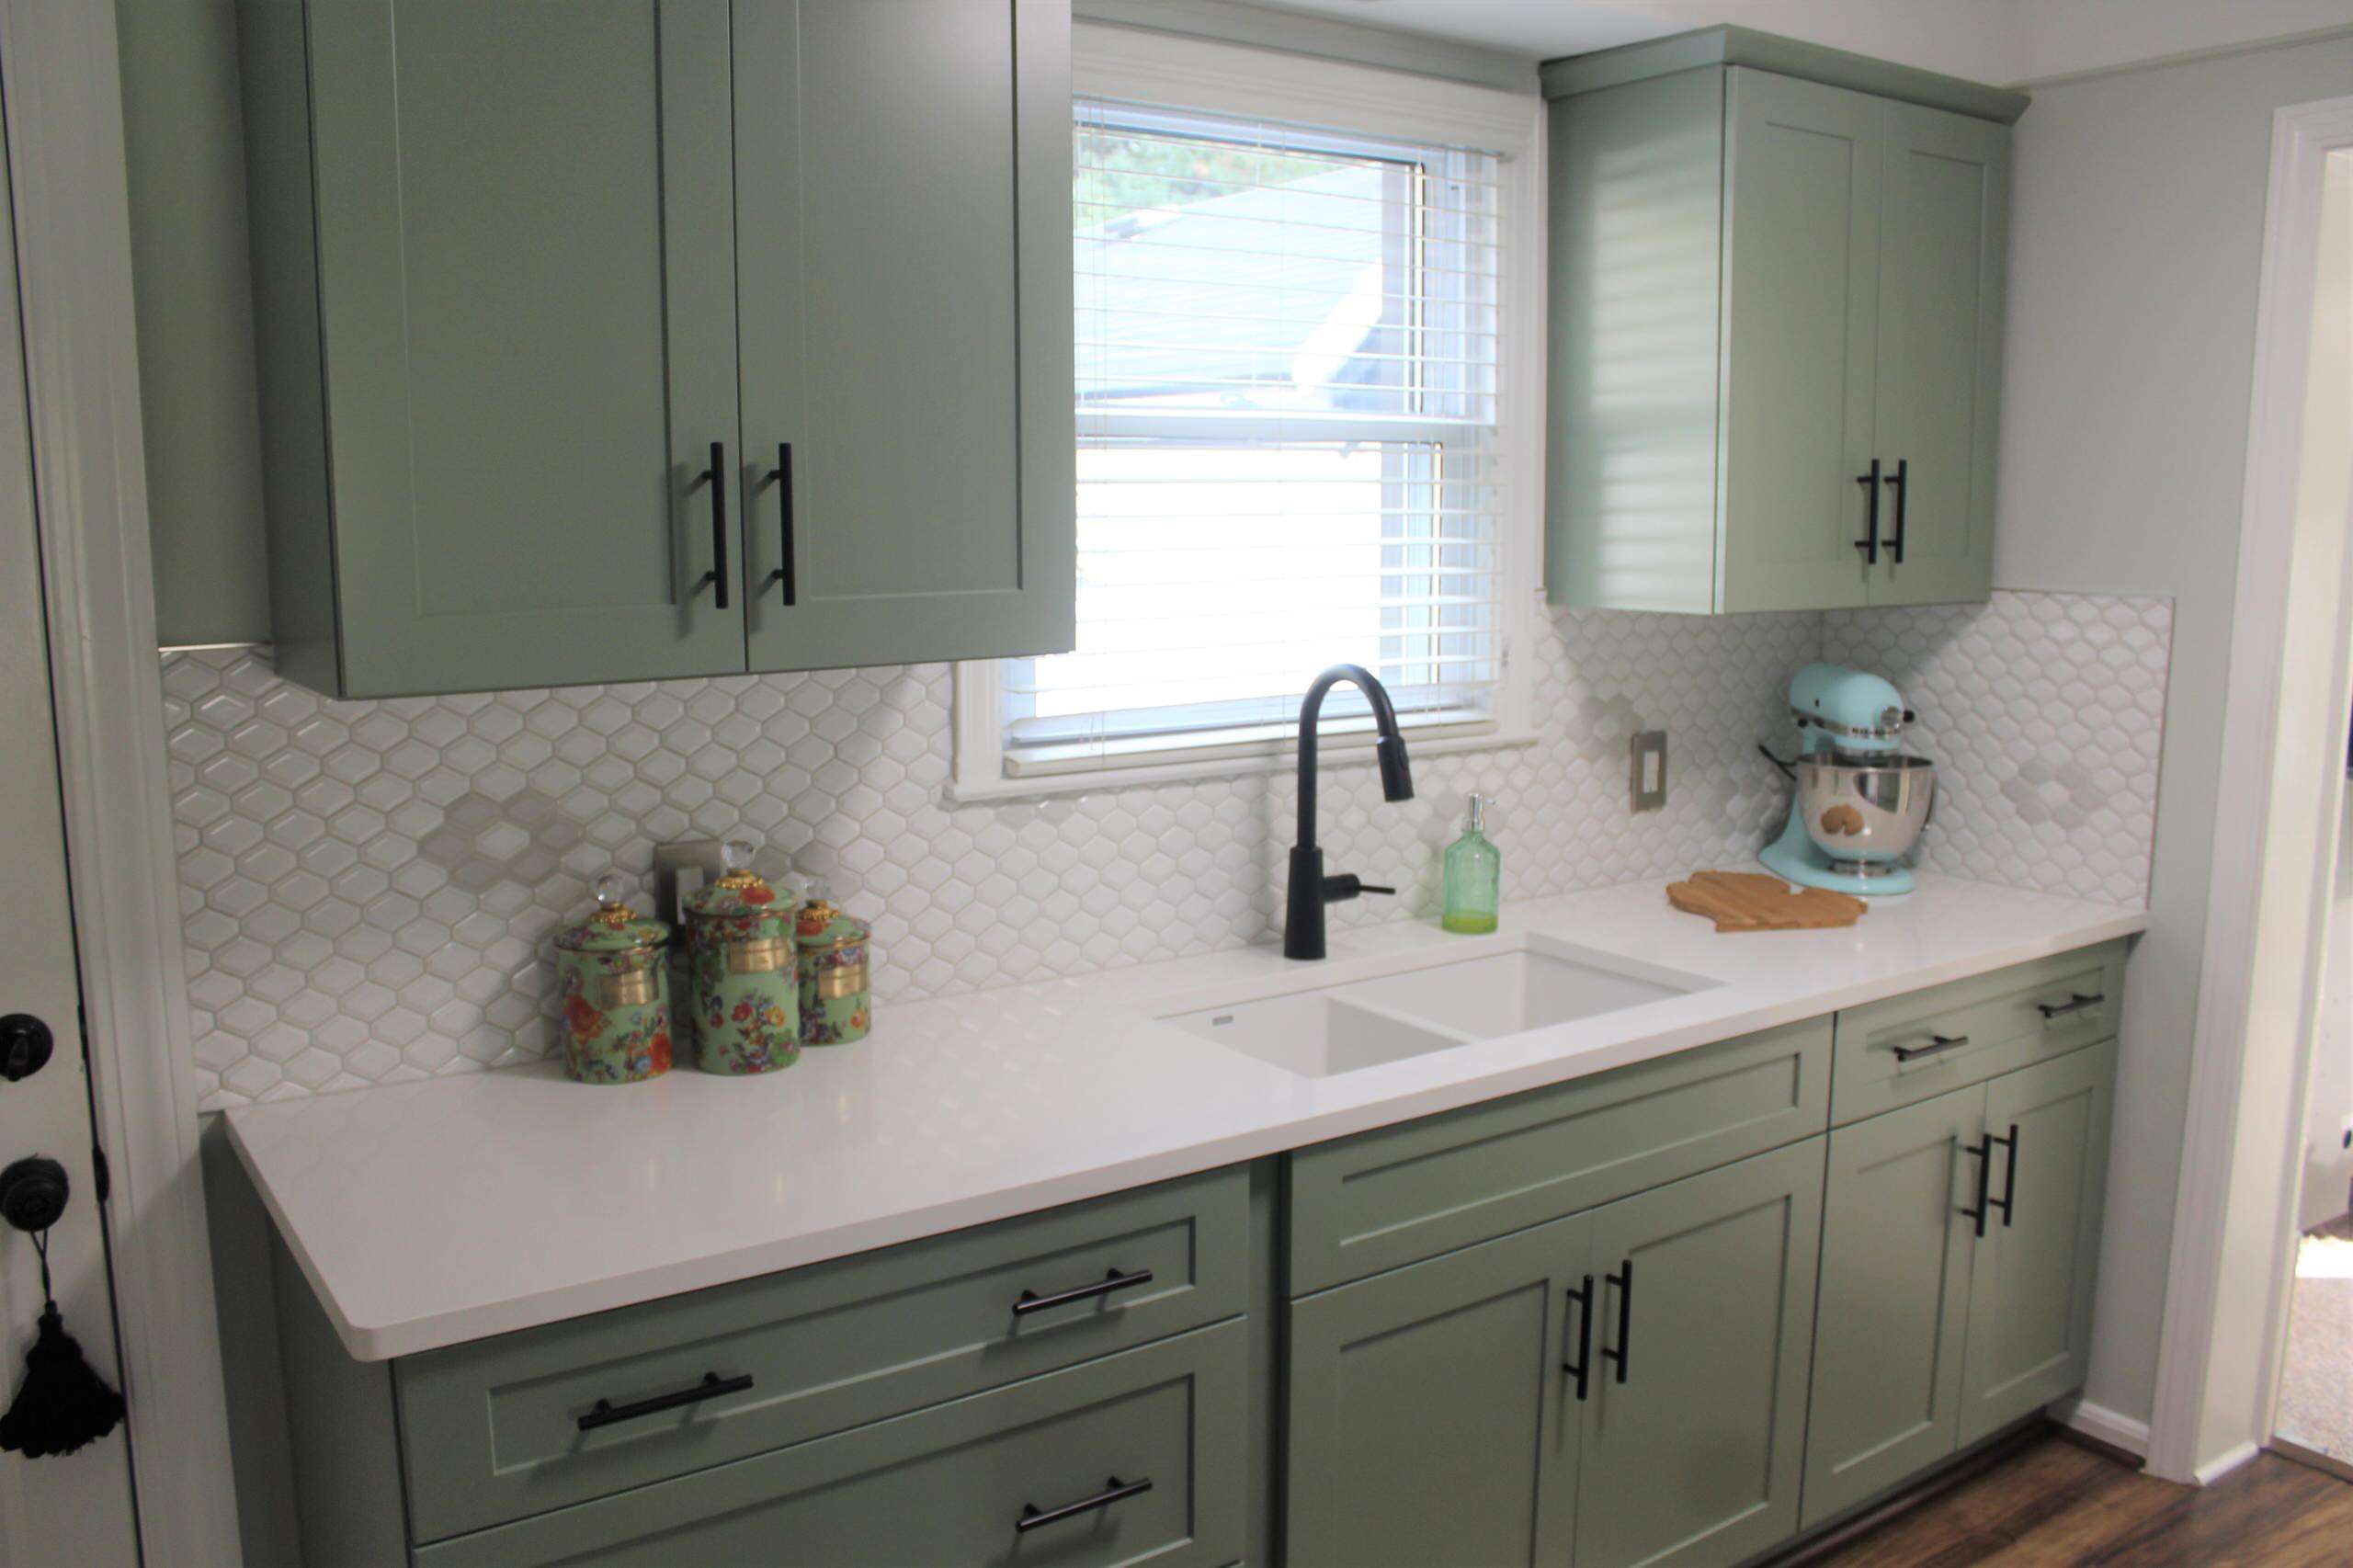 Green Kitchen Cabinets with Black Hardware: A Natural Pairing